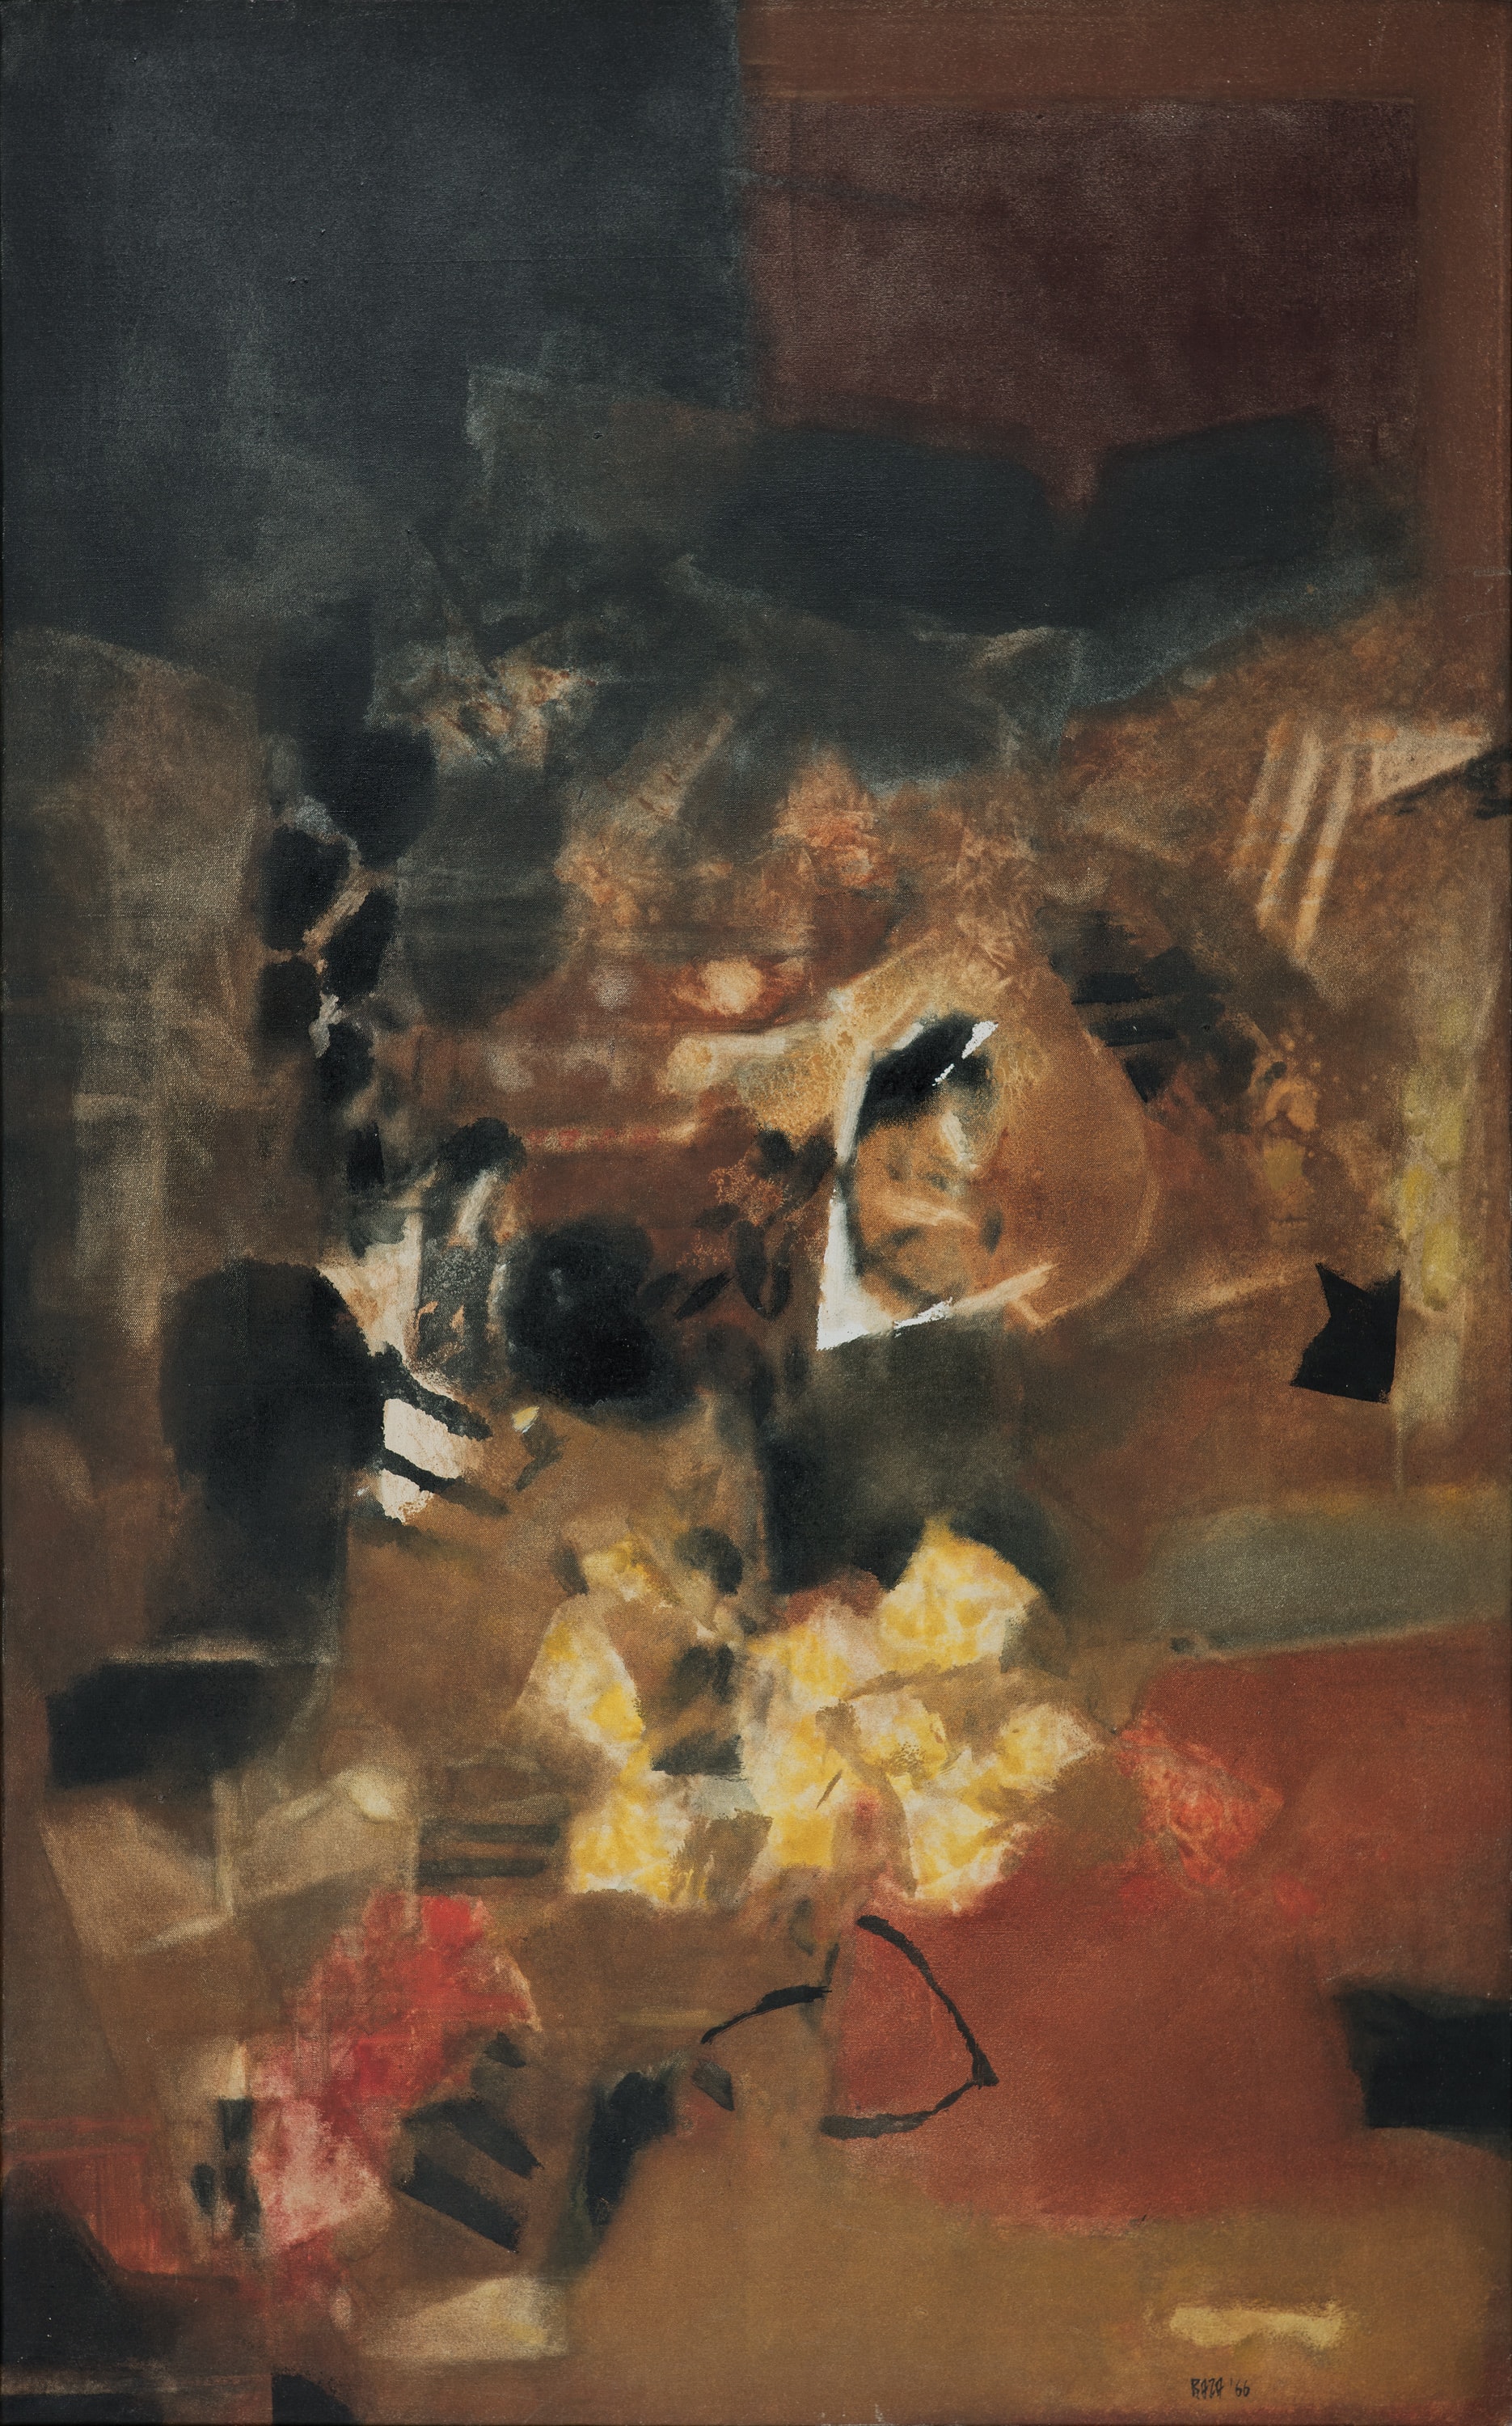 A painting by S.H. Raza (Source - DAG)